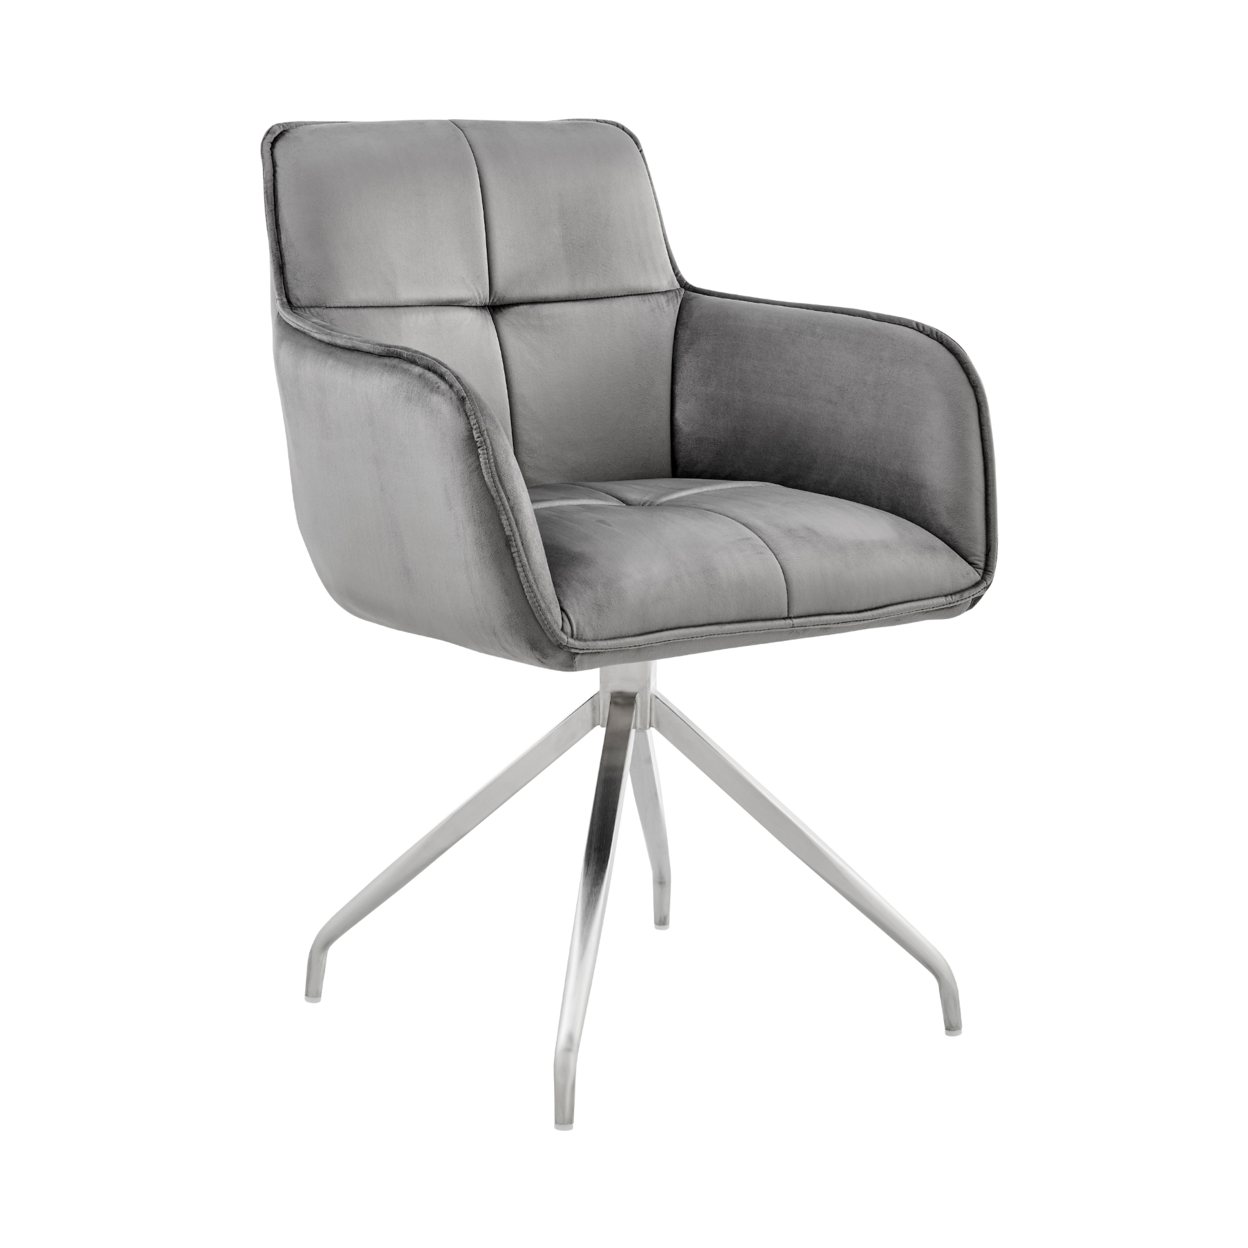 Accent Chair With Square Tufting And Metal Legs, Gray And Silver- Saltoro Sherpi